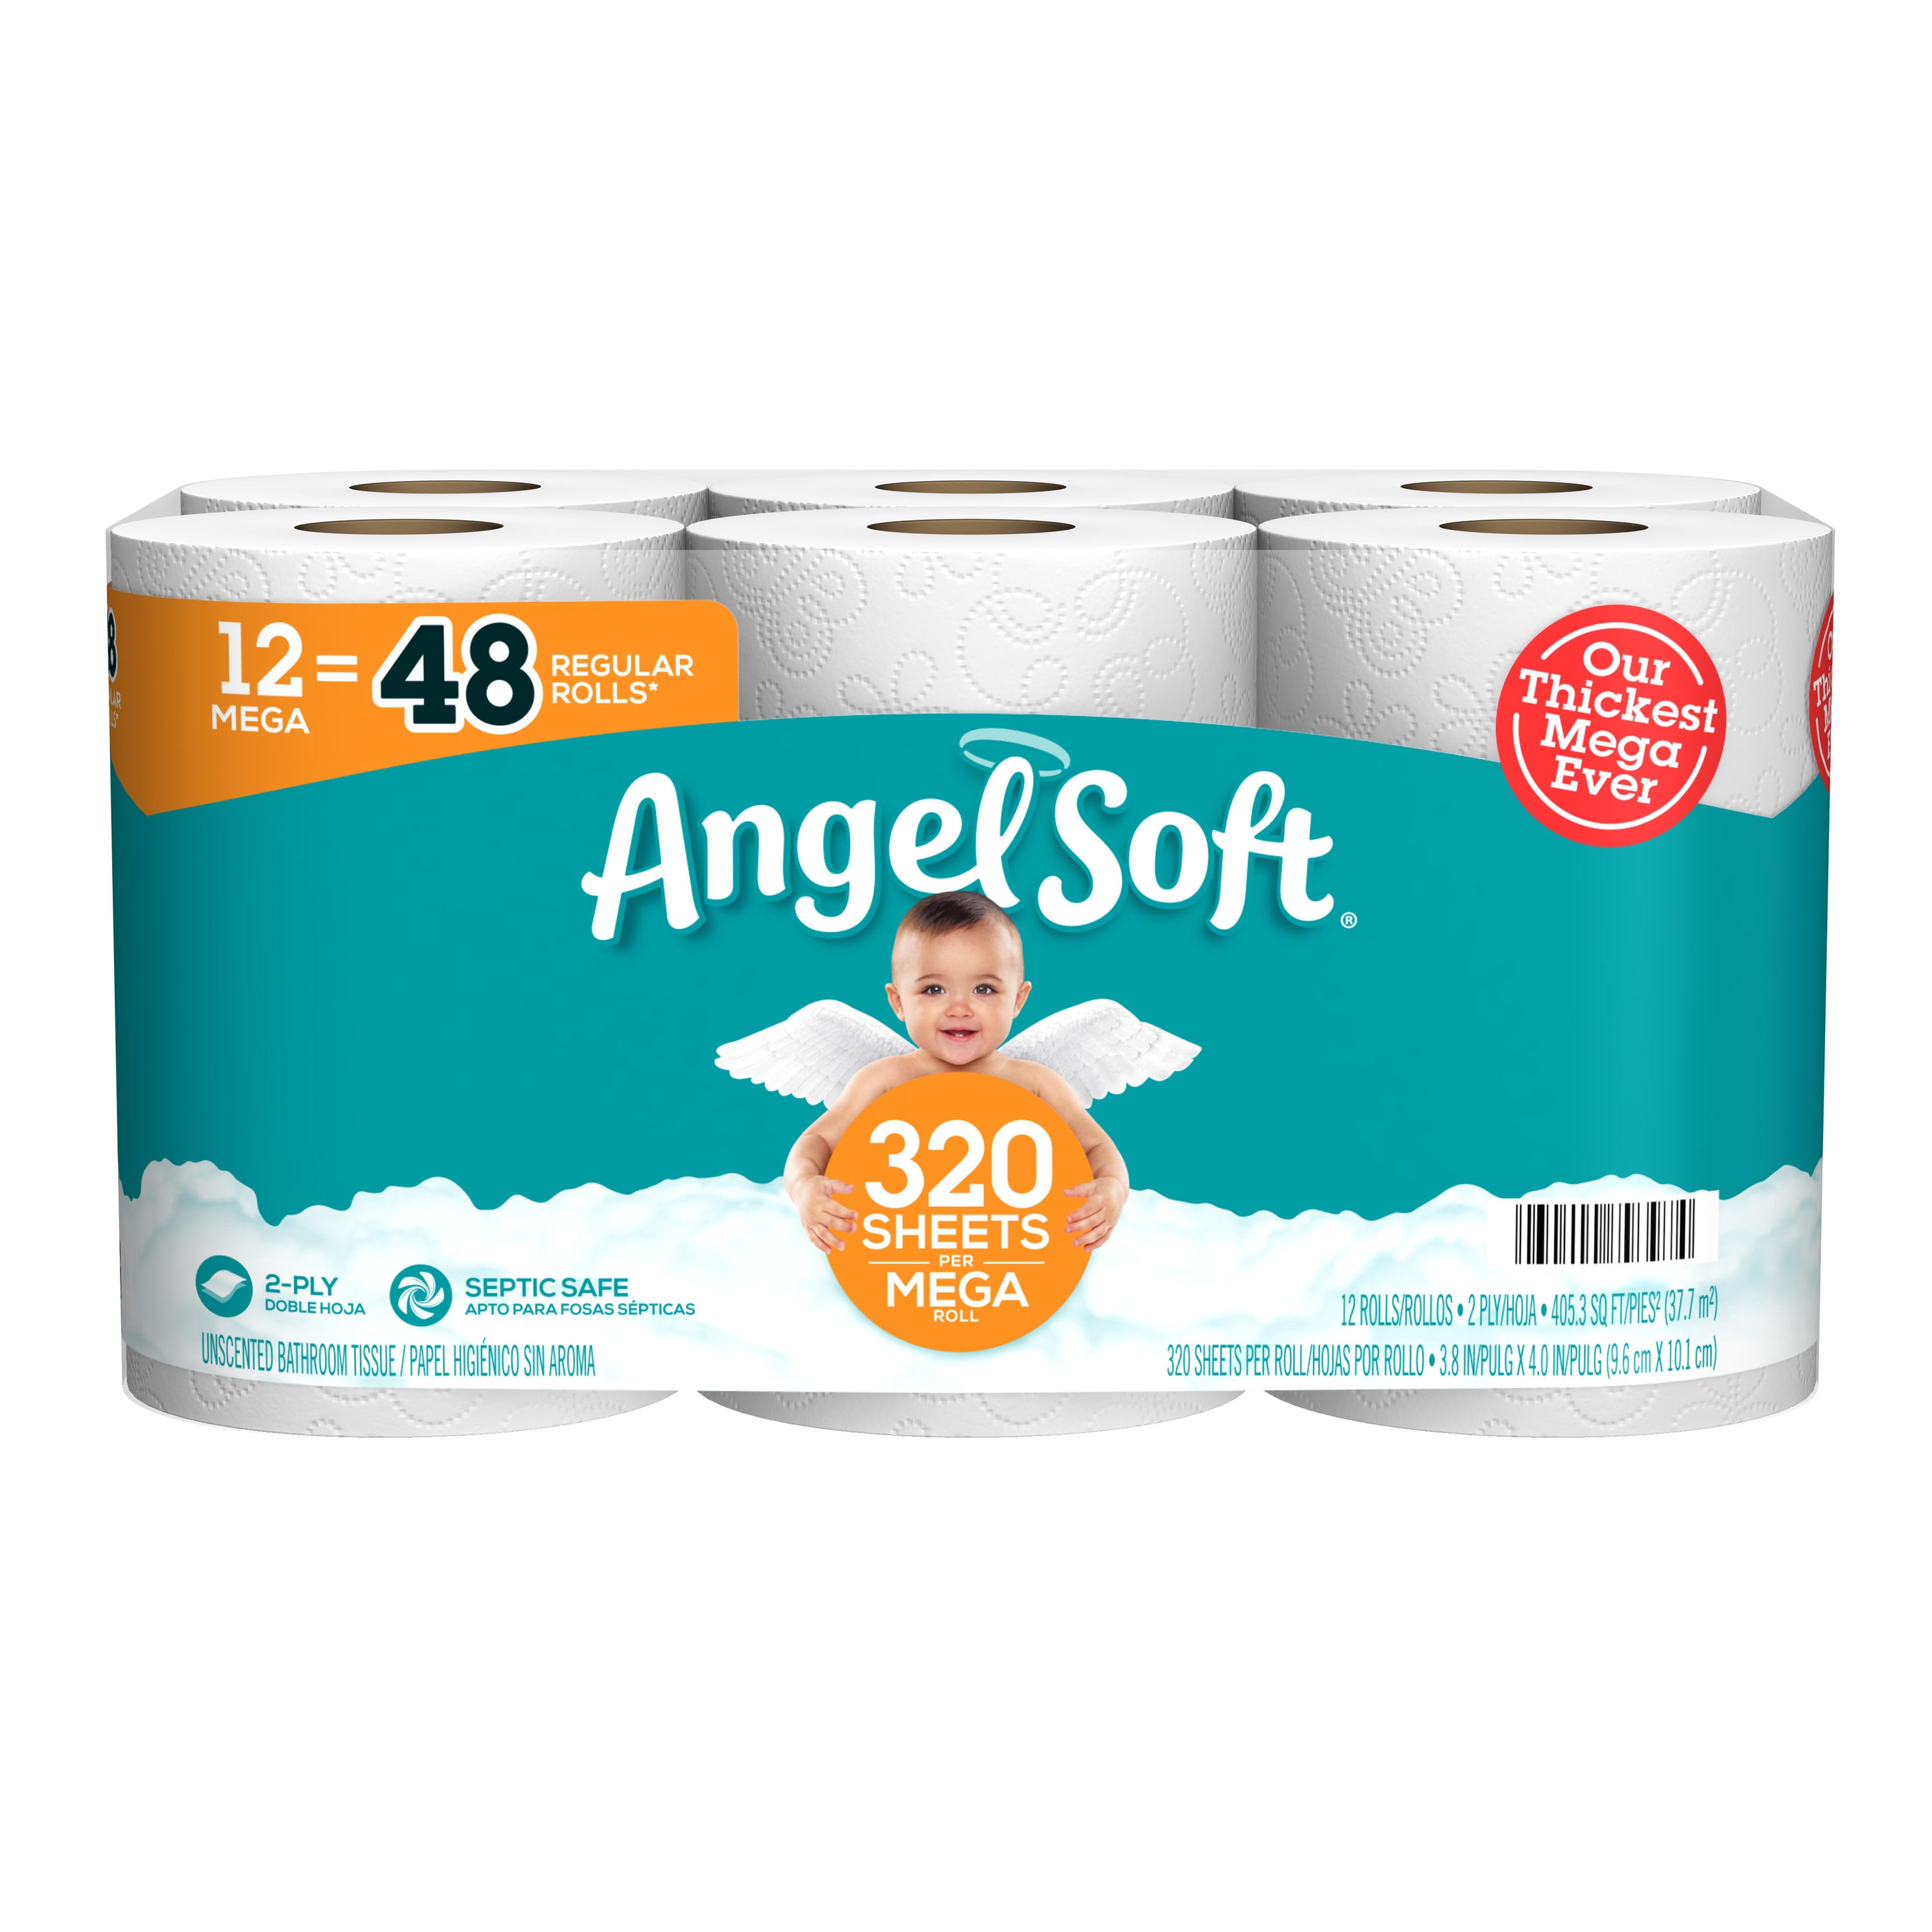 Fine Extra Soft Toilet Tissue Rolls - Pack Of 12 Rolls, 200 Sheets X 2 Ply,  White : Buy Online at Best Price in KSA - Souq is now : Health